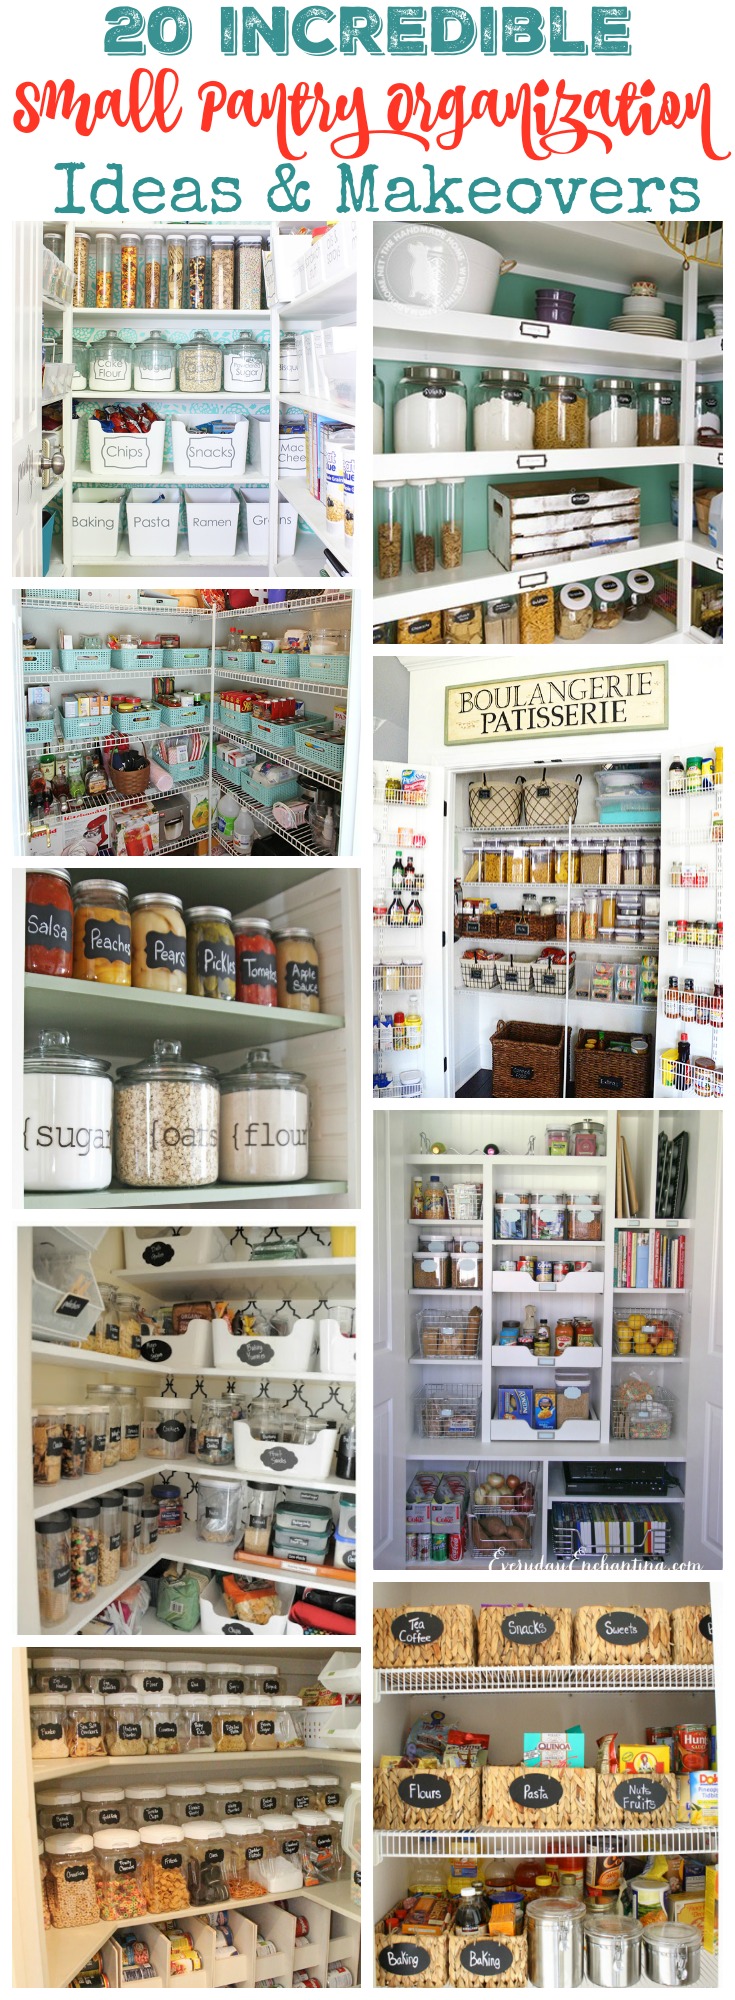 https://www.thehappyhousie.com/wp-content/uploads/2016/01/20-Incredible-Small-Pantry-Ideas-Makeovers-at-thehappyhousie.com_.jpg